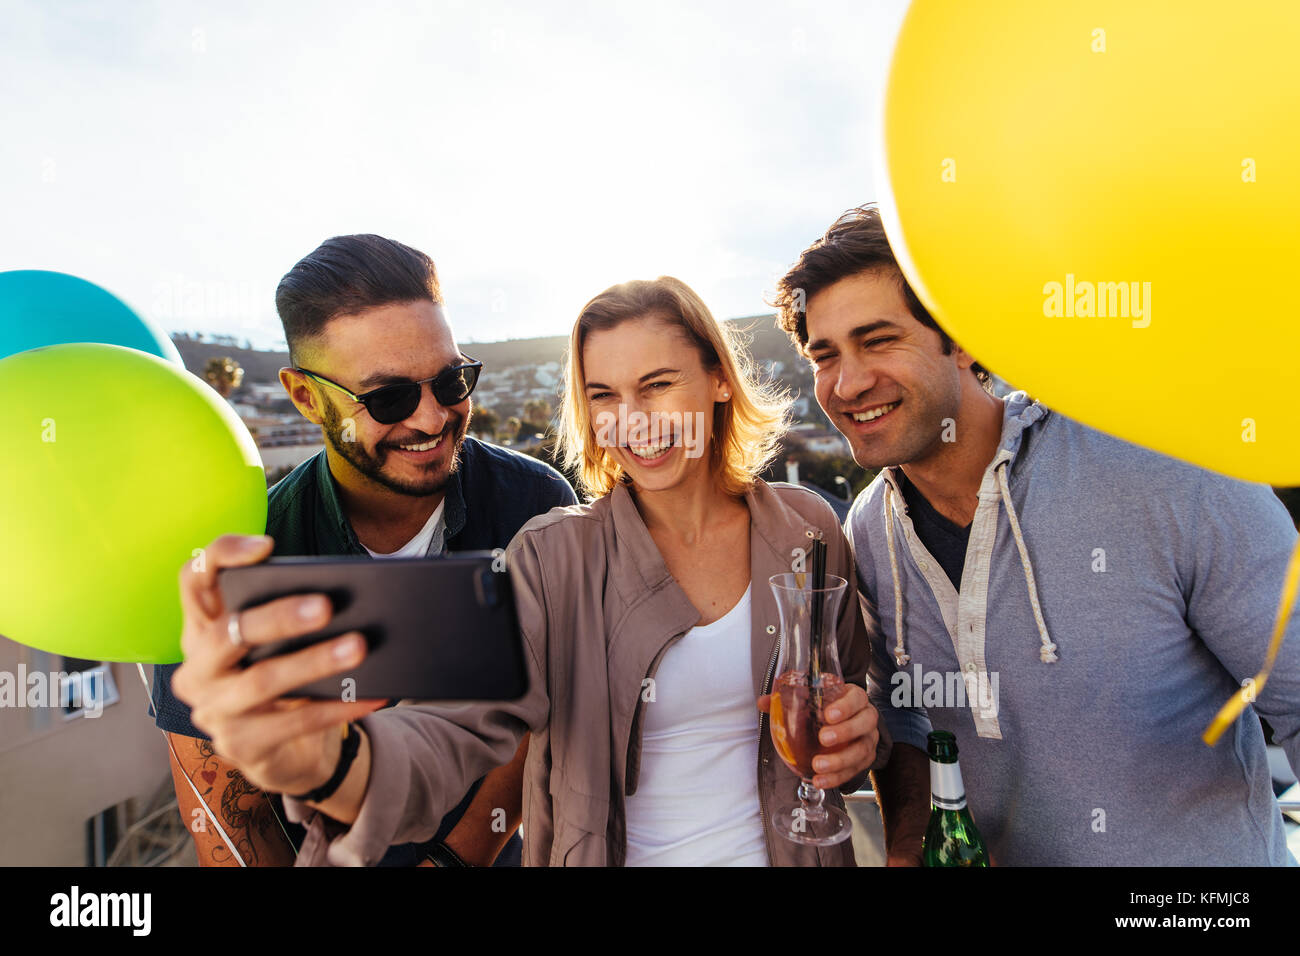 Young friends partying together taking selfie. Group of people with drinks and balloons on a rooftop party taking selfie. Stock Photo